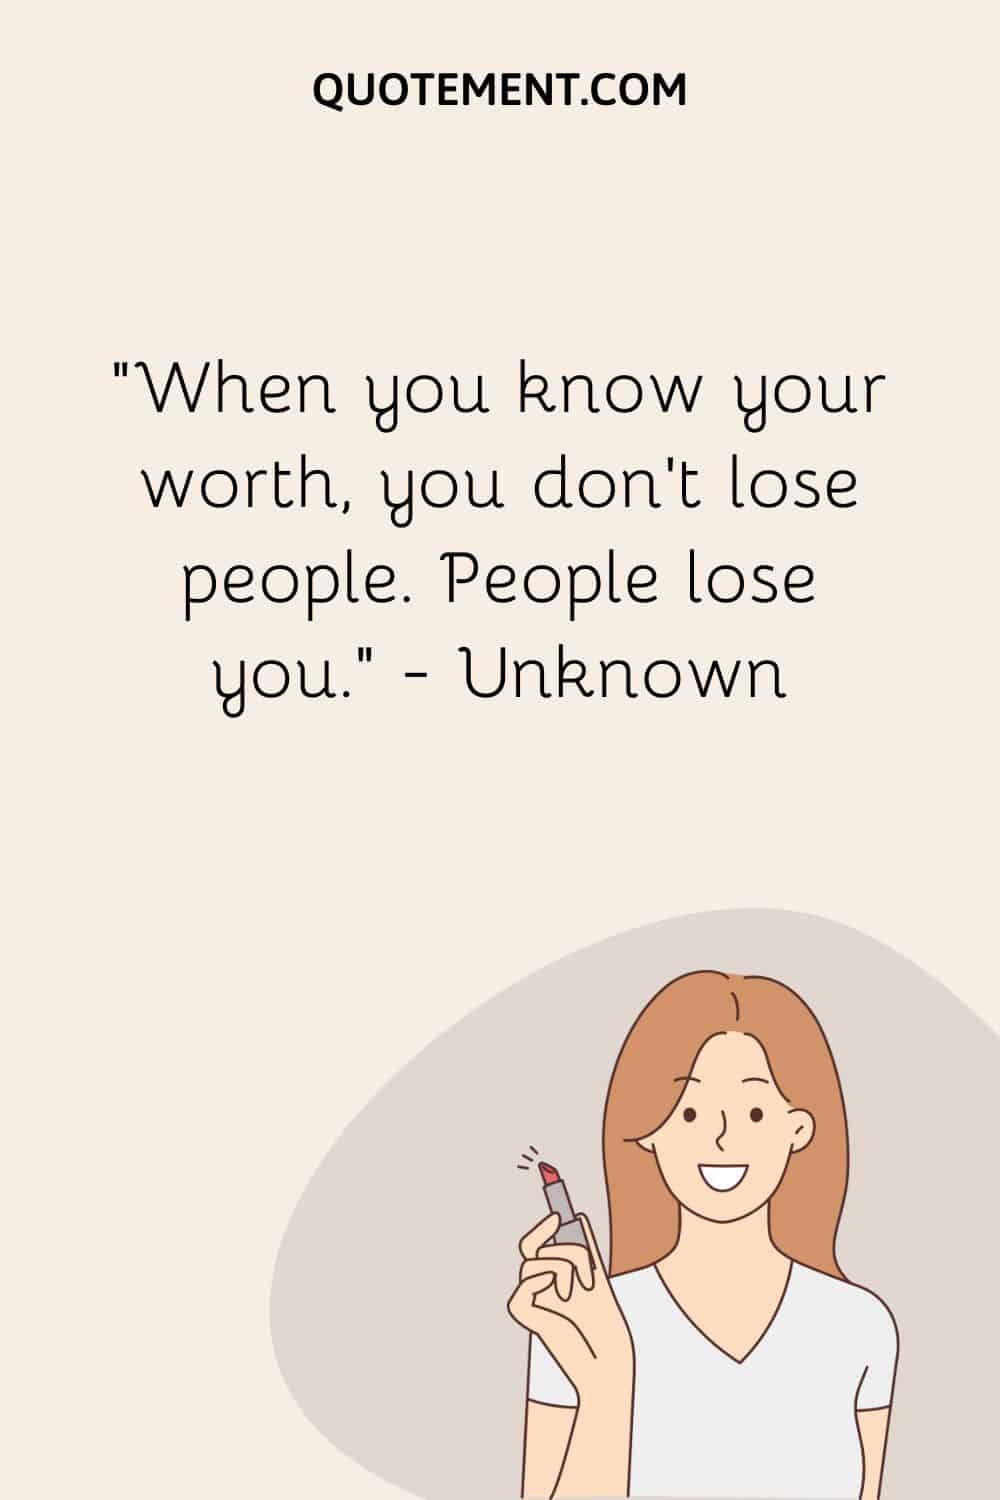 When you know your worth, you don’t lose people. People lose you